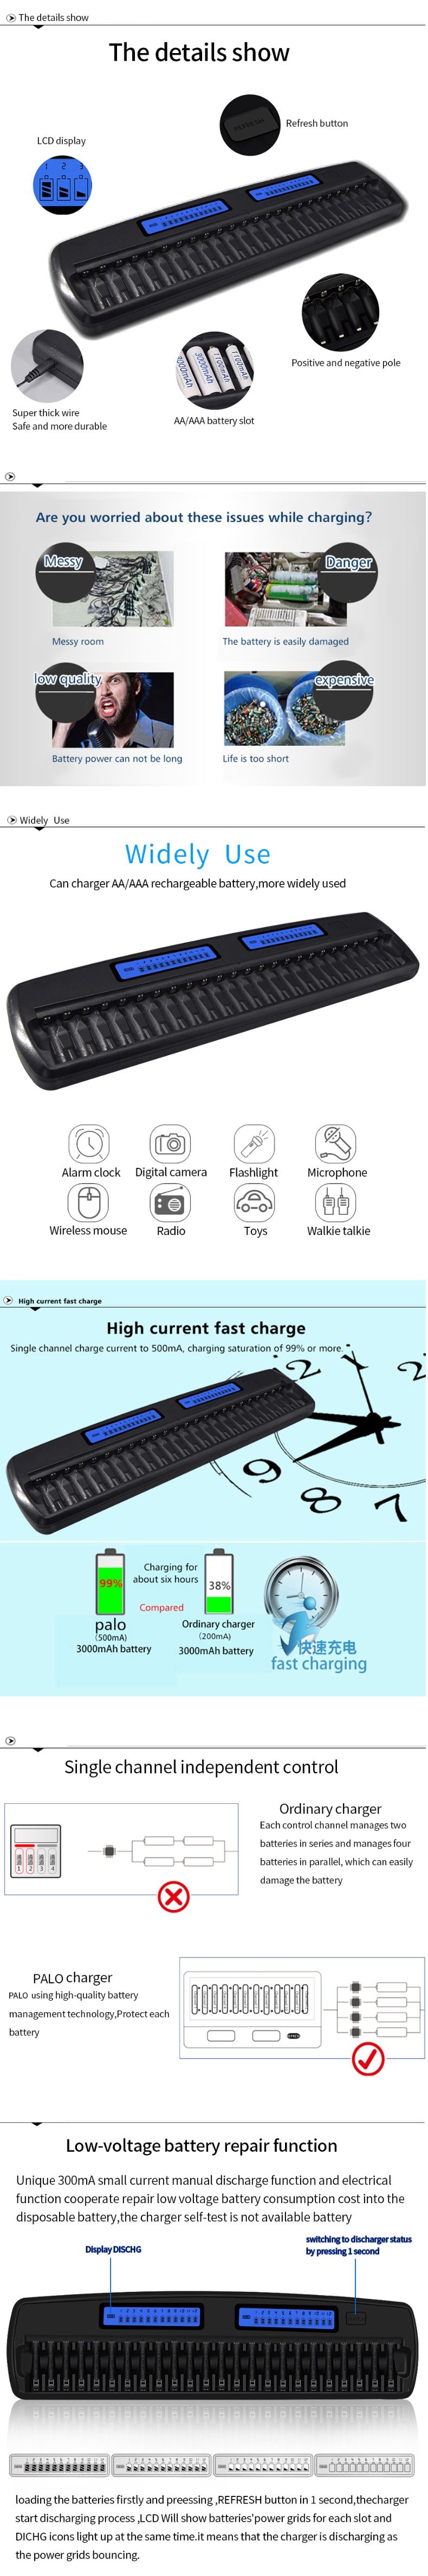 PALO-24-Slots-Battery-Charger-AAAAA-Battery-Charger-Flashlight-Battery-Charger-EU-PlugUS-Plug-1589803